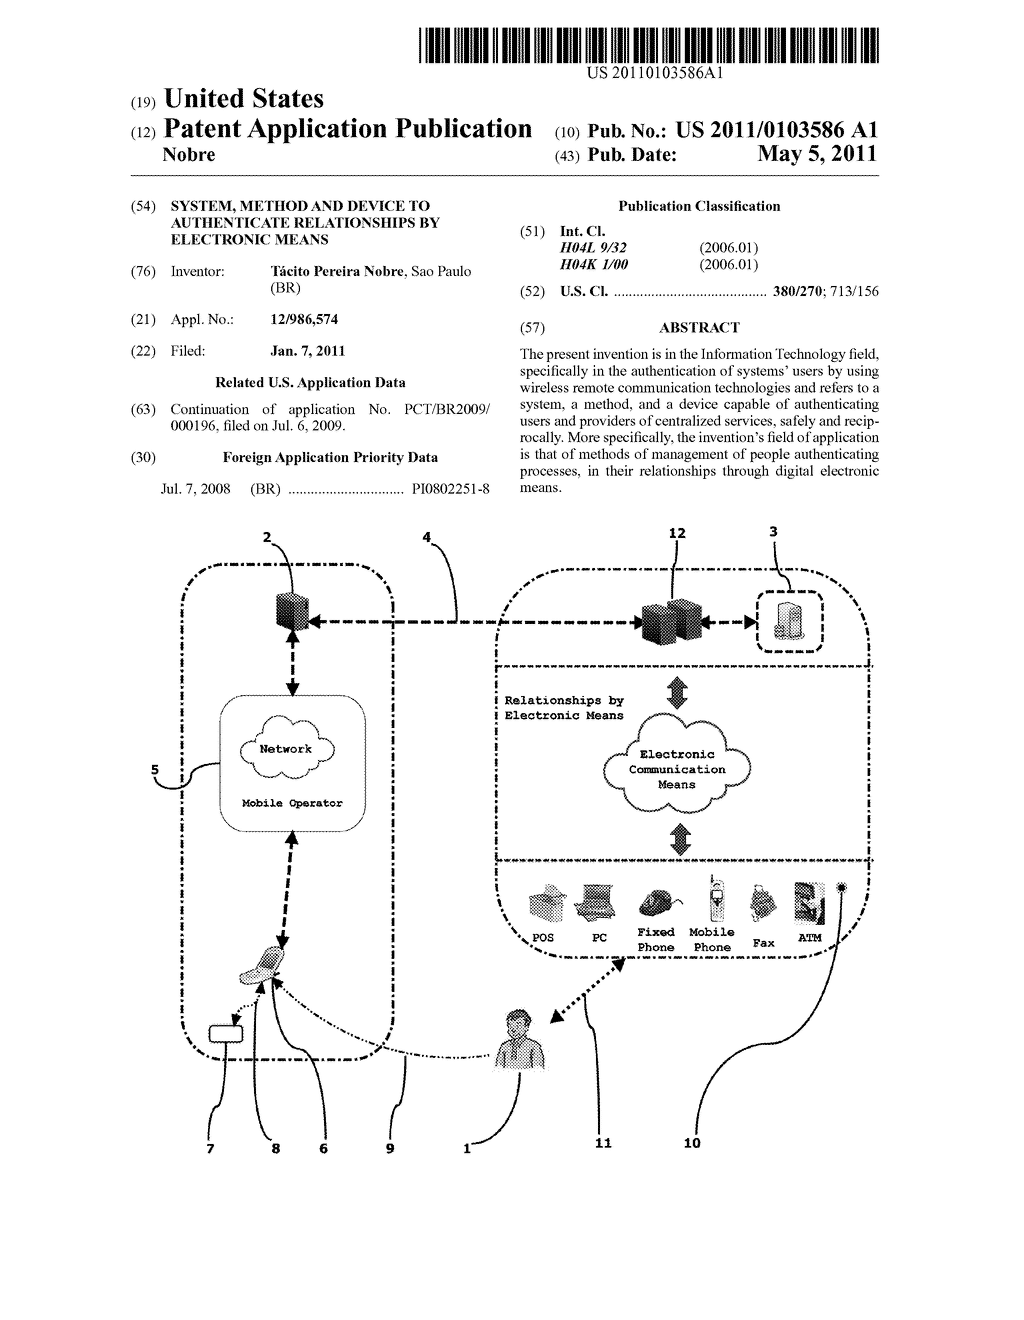 System, Method and Device To Authenticate Relationships By Electronic Means - diagram, schematic, and image 01